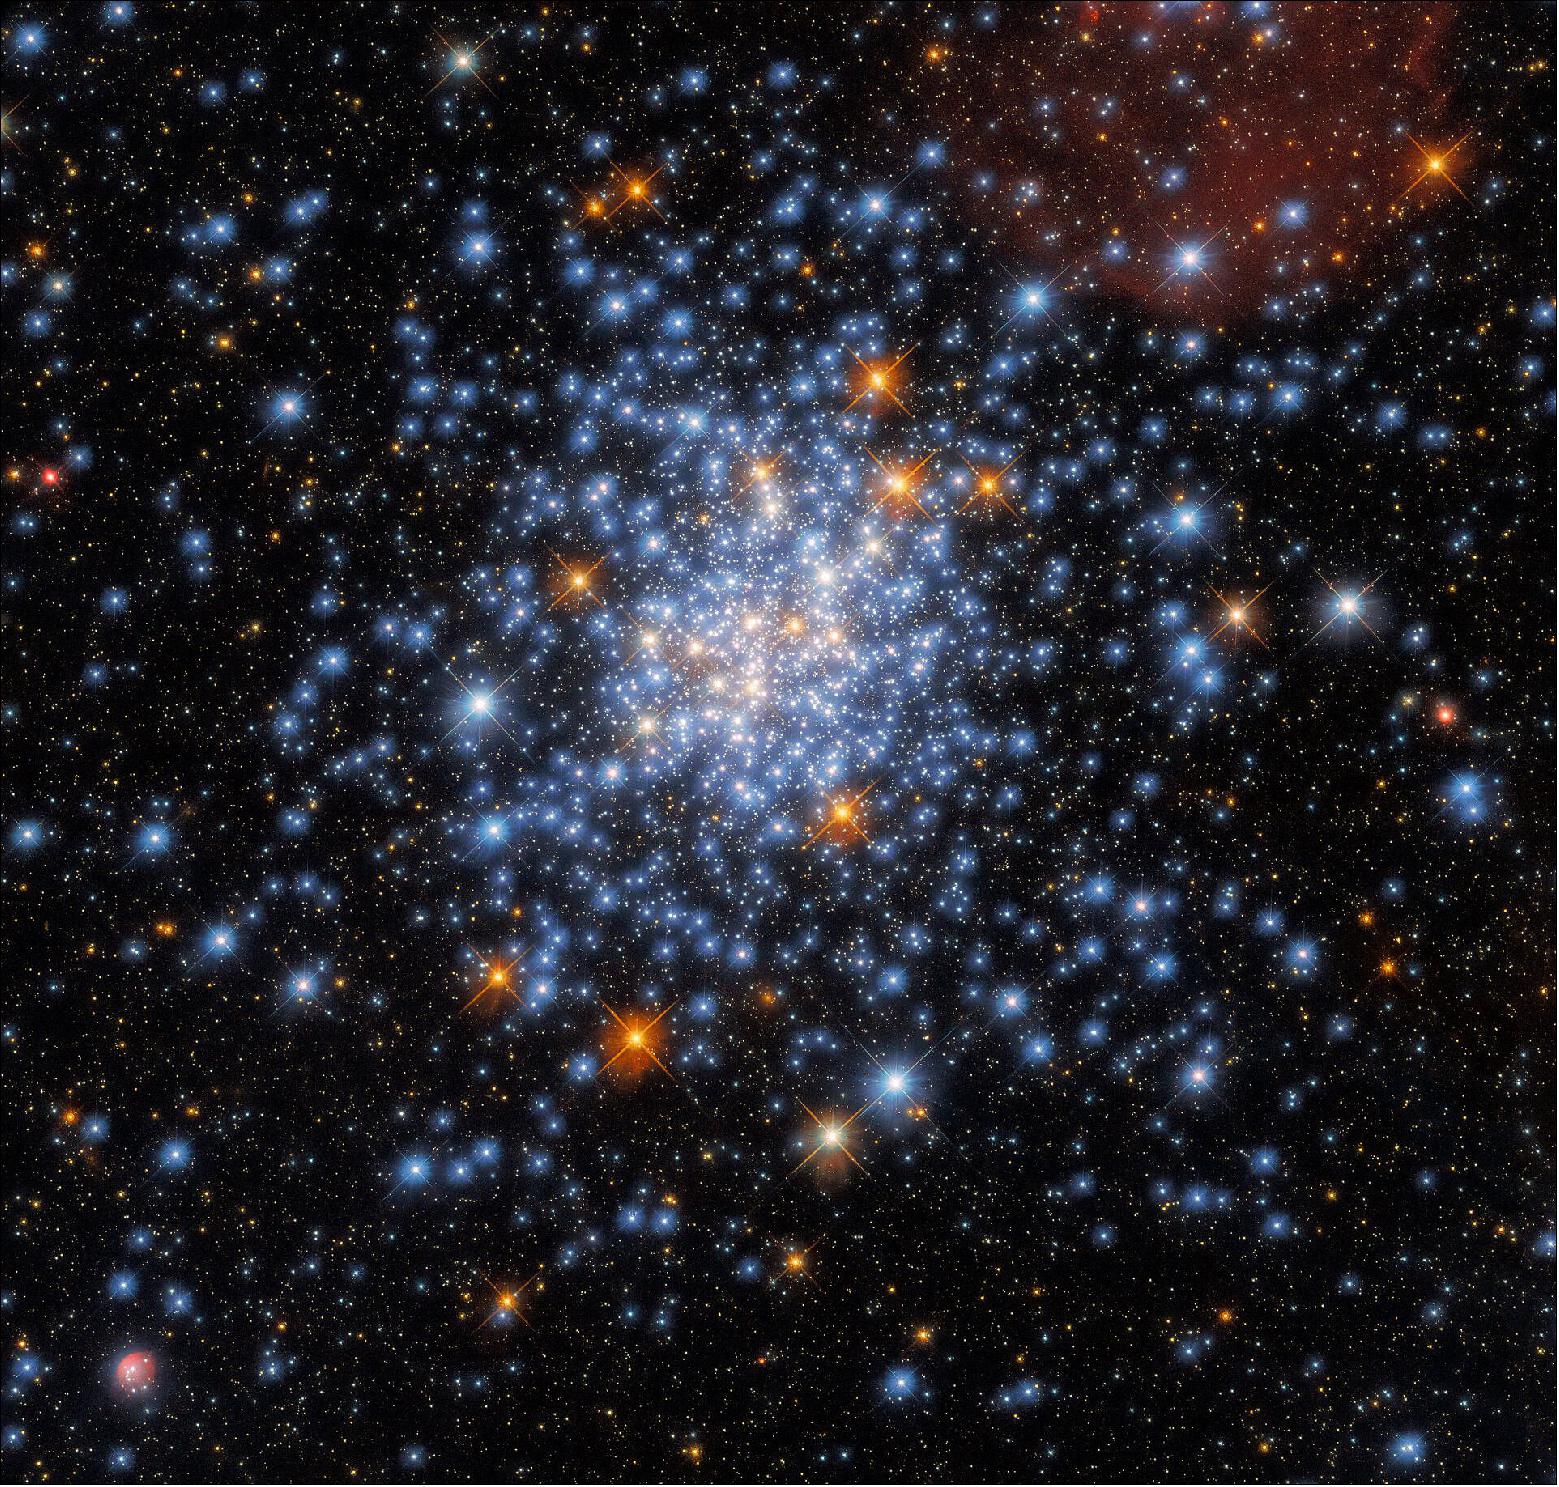 Figure 73: This Picture of the Week depicts the open star cluster NGC 330, which lies around 180,000 light-years away inside the Small Magellanic Cloud. The cluster — which is in the constellation Tucana (The Toucan) — contains a multitude of stars, many of which are scattered across this striking image (image credit: ESA/Hubble & NASA, J. Kalirai, A. Milone; CC BY 4.0)